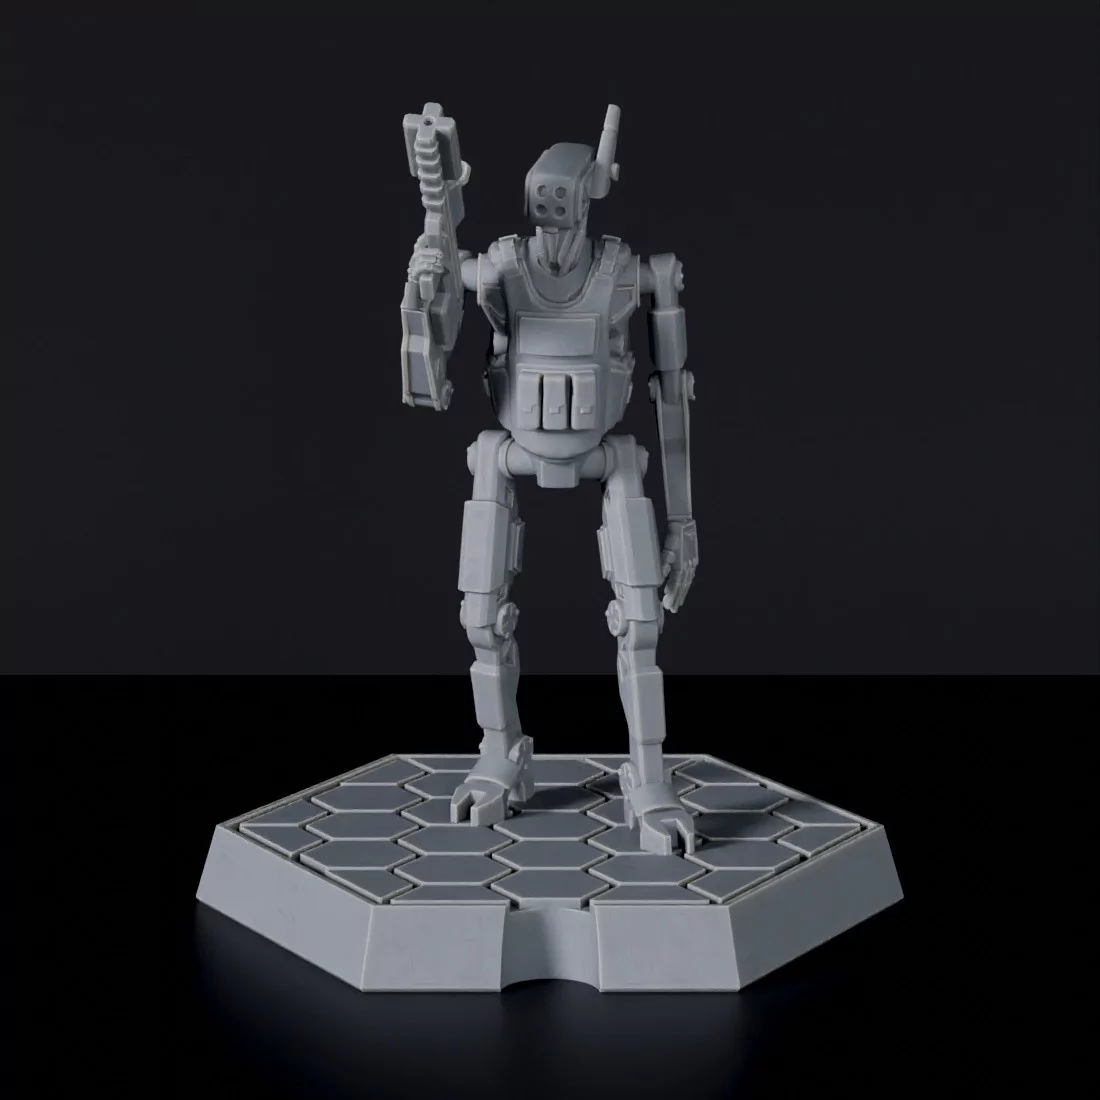 Futuristic miniature of sci fi police robot with gun - Roger-One 3 for Gridwars TCPD army